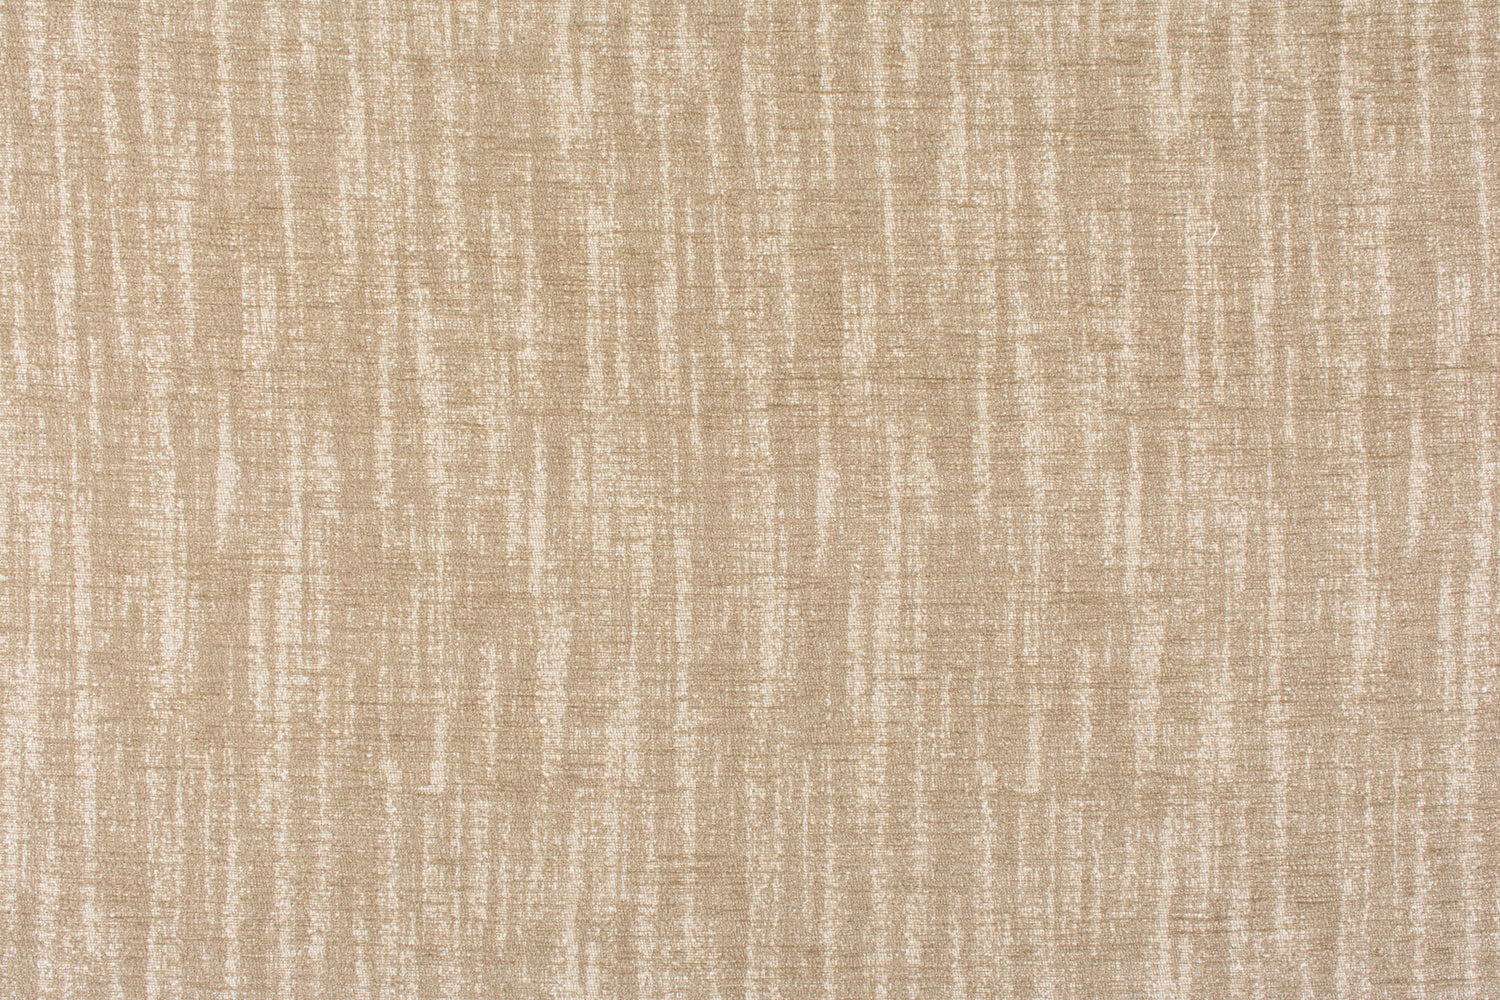 Gallium fabric in sand color - pattern number EL 0002NECK - by Scalamandre in the Old World Weavers collection